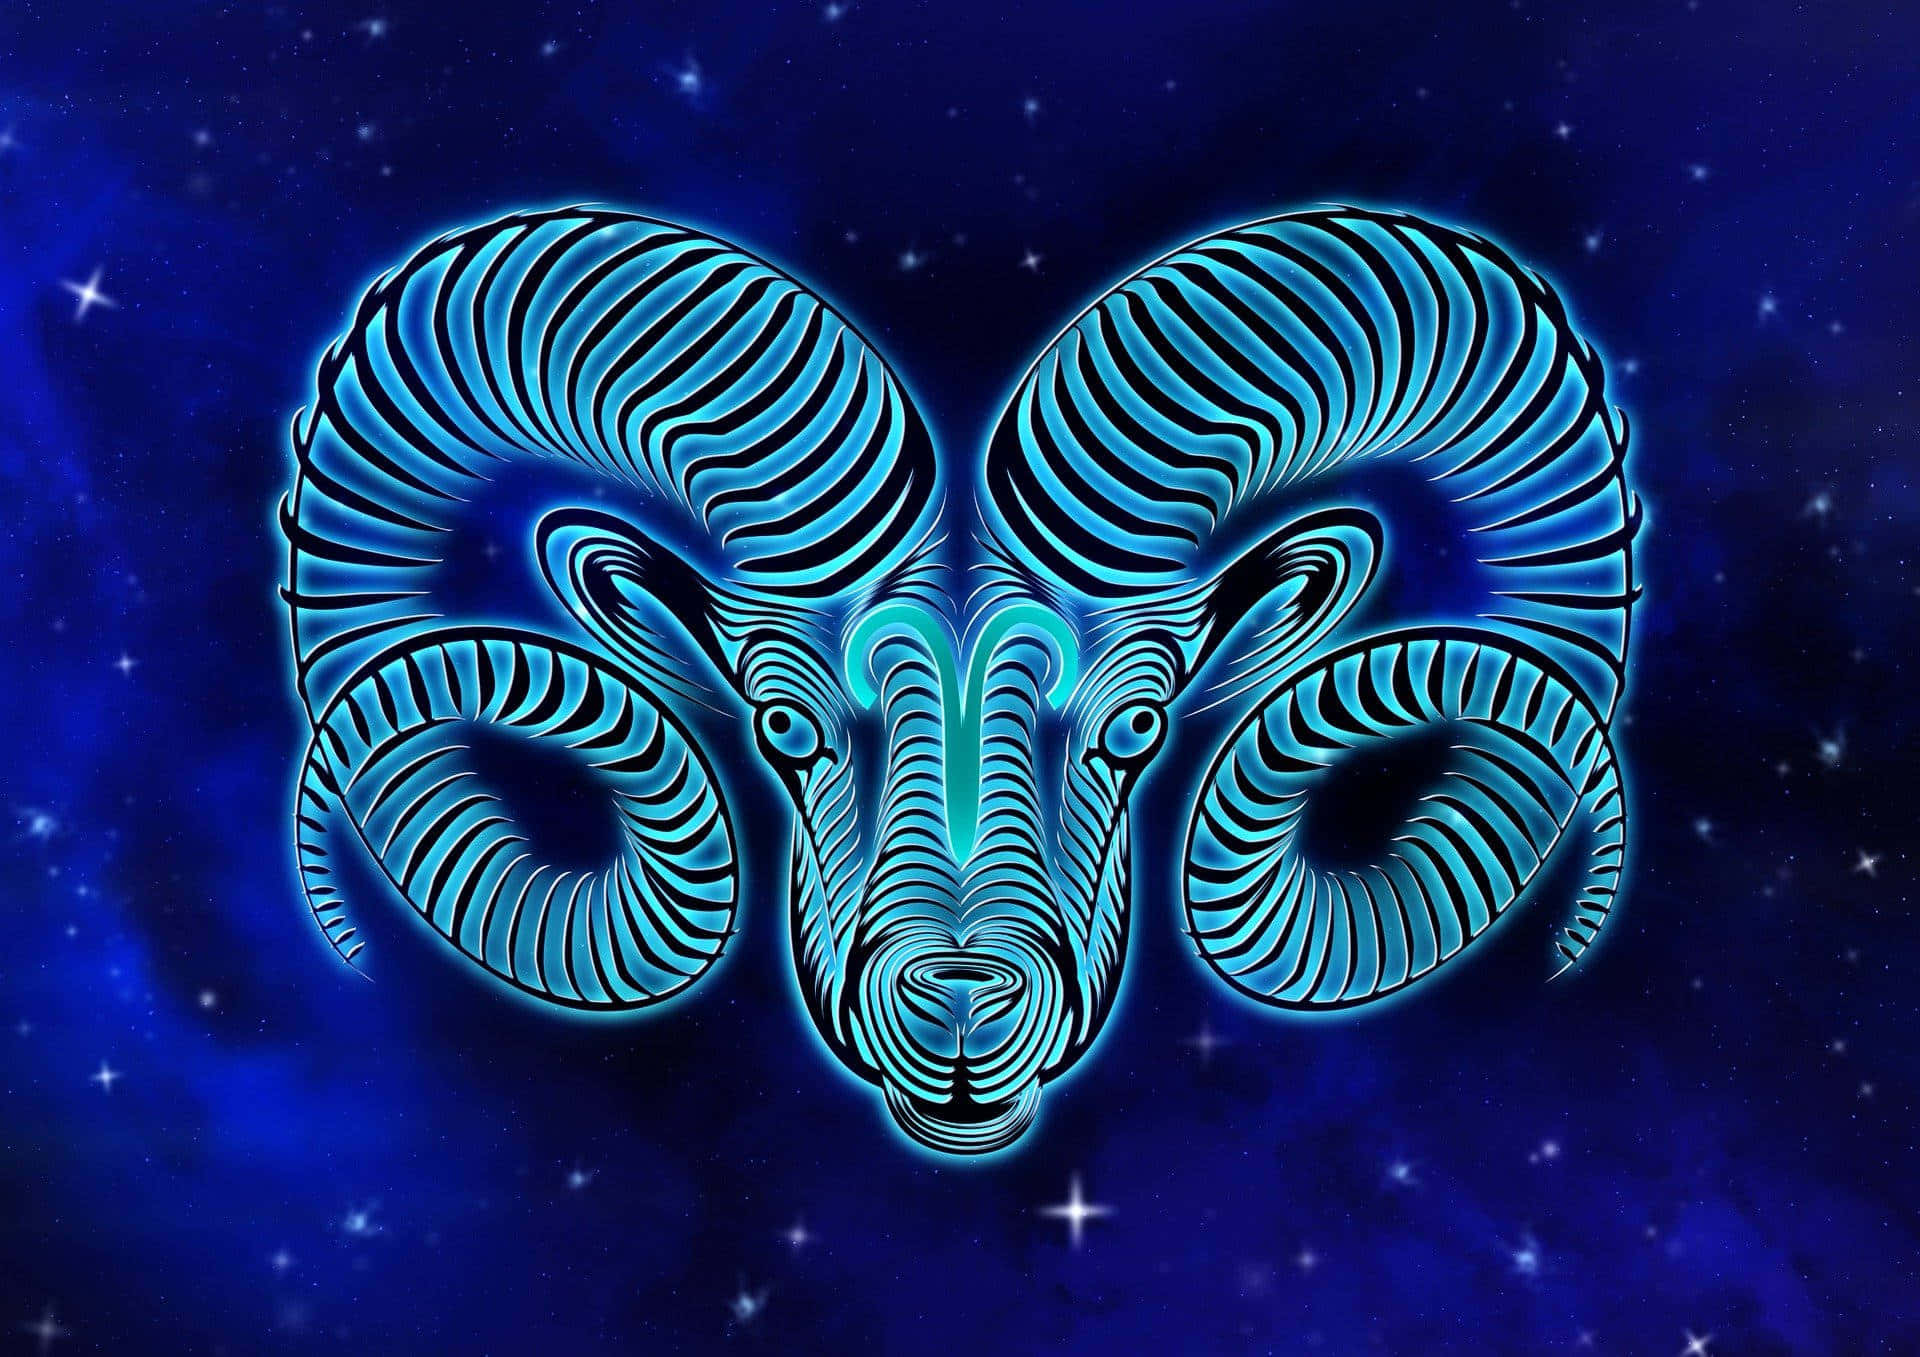 A majestic Aries illustration with a mysterious cosmic background